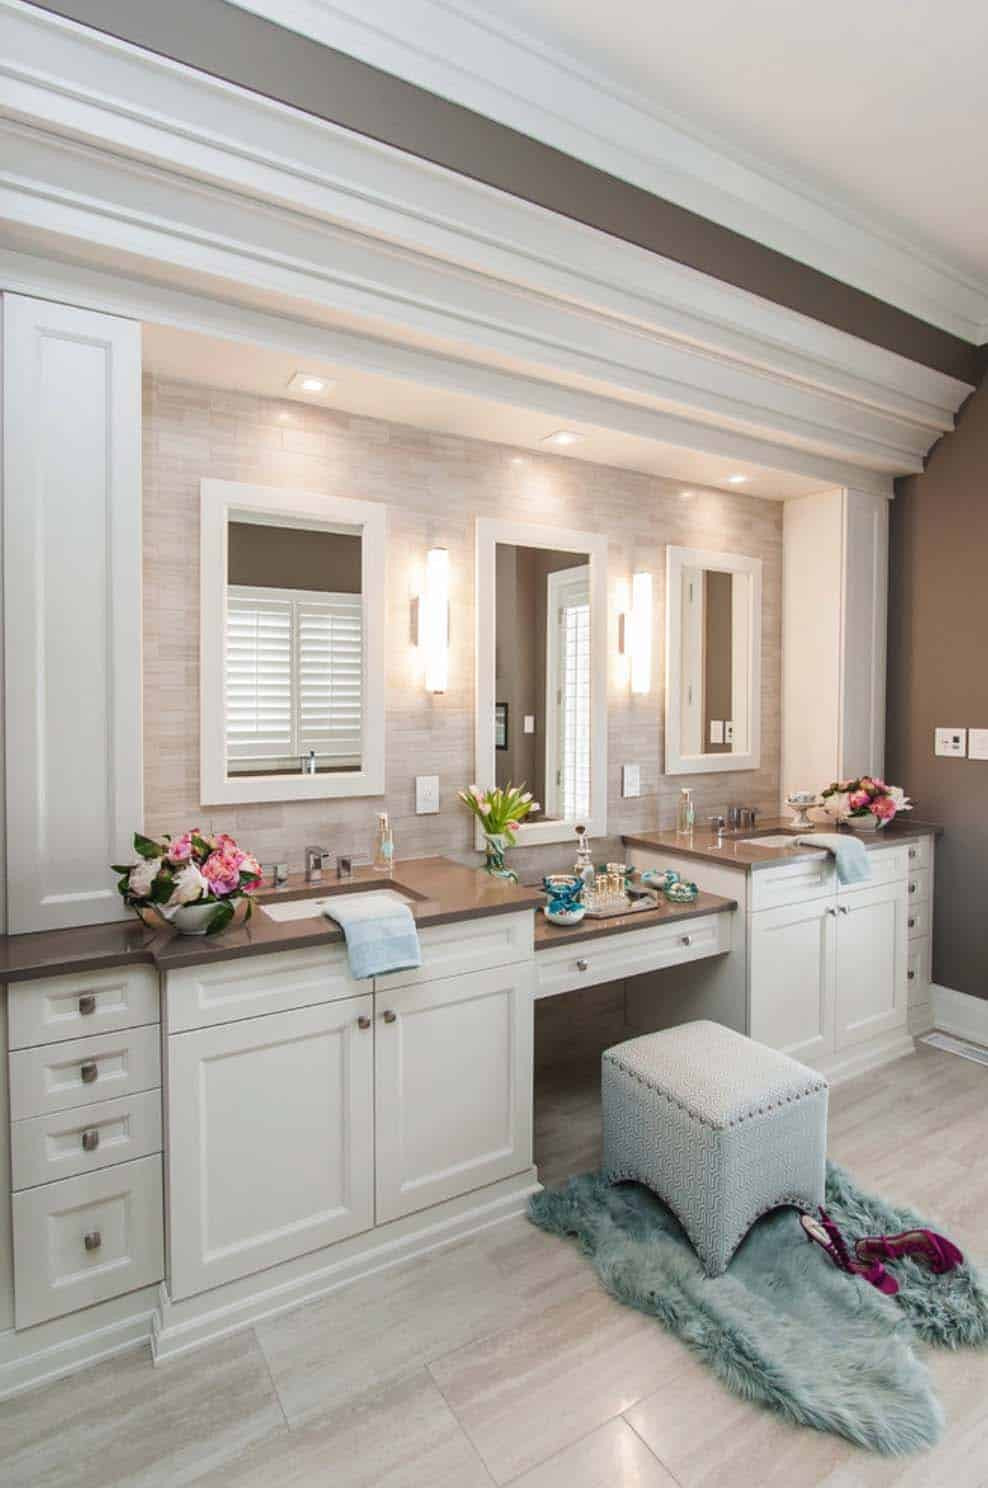 Photos Of Bathroom Remodels
 53 Most fabulous traditional style bathroom designs ever